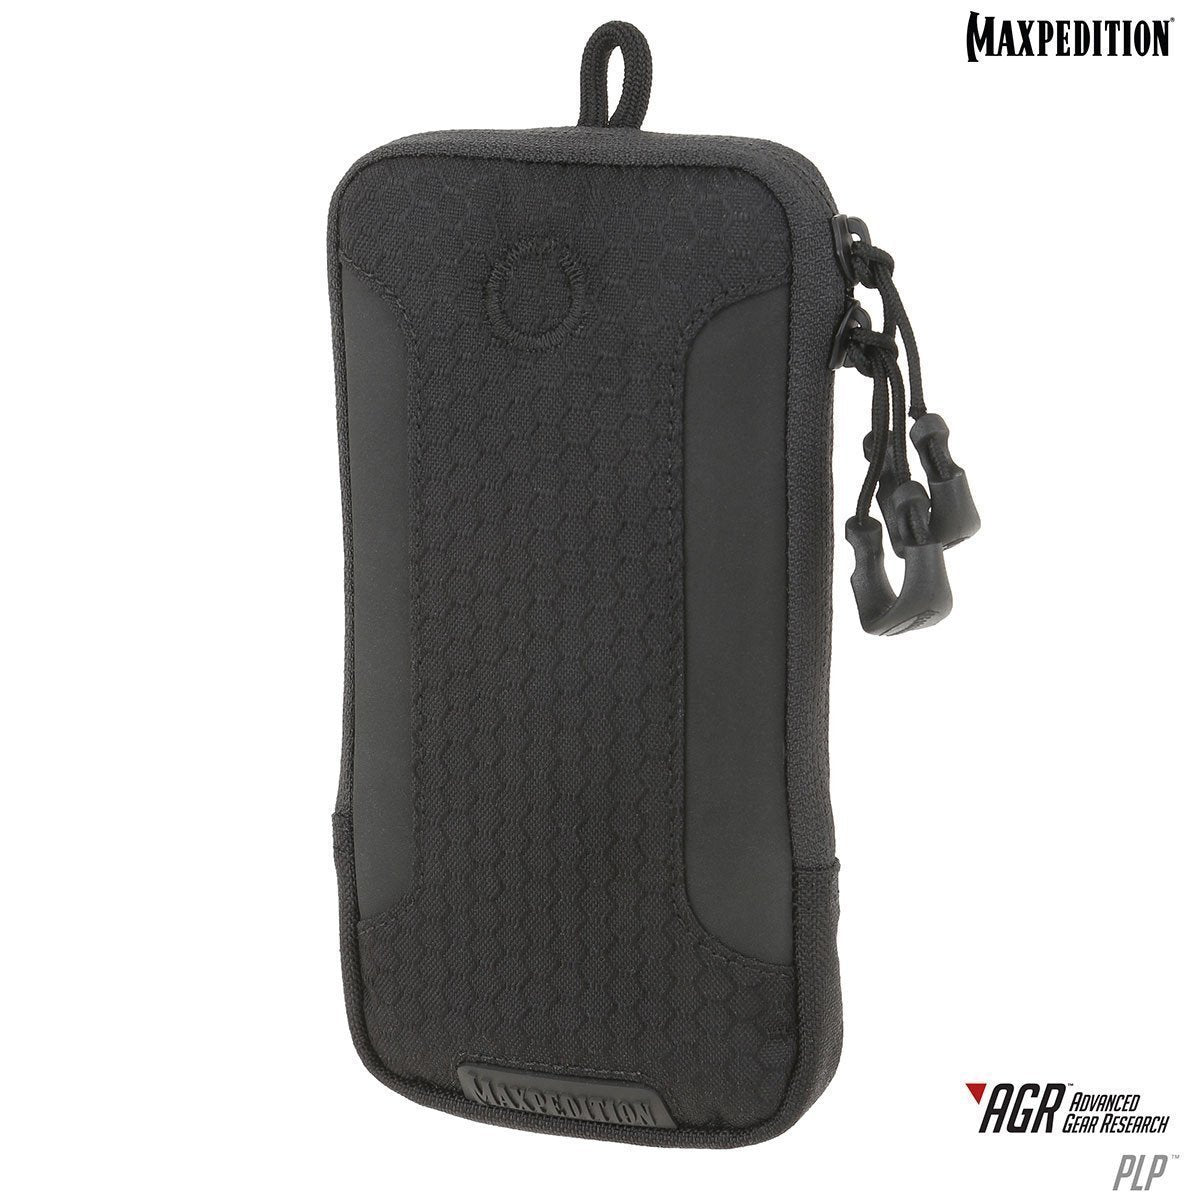 Maxpedition PLP iPhone 6/6S/7 Plus Pouch Accessories Maxpedition Gray Tactical Gear Supplier Tactical Distributors Australia